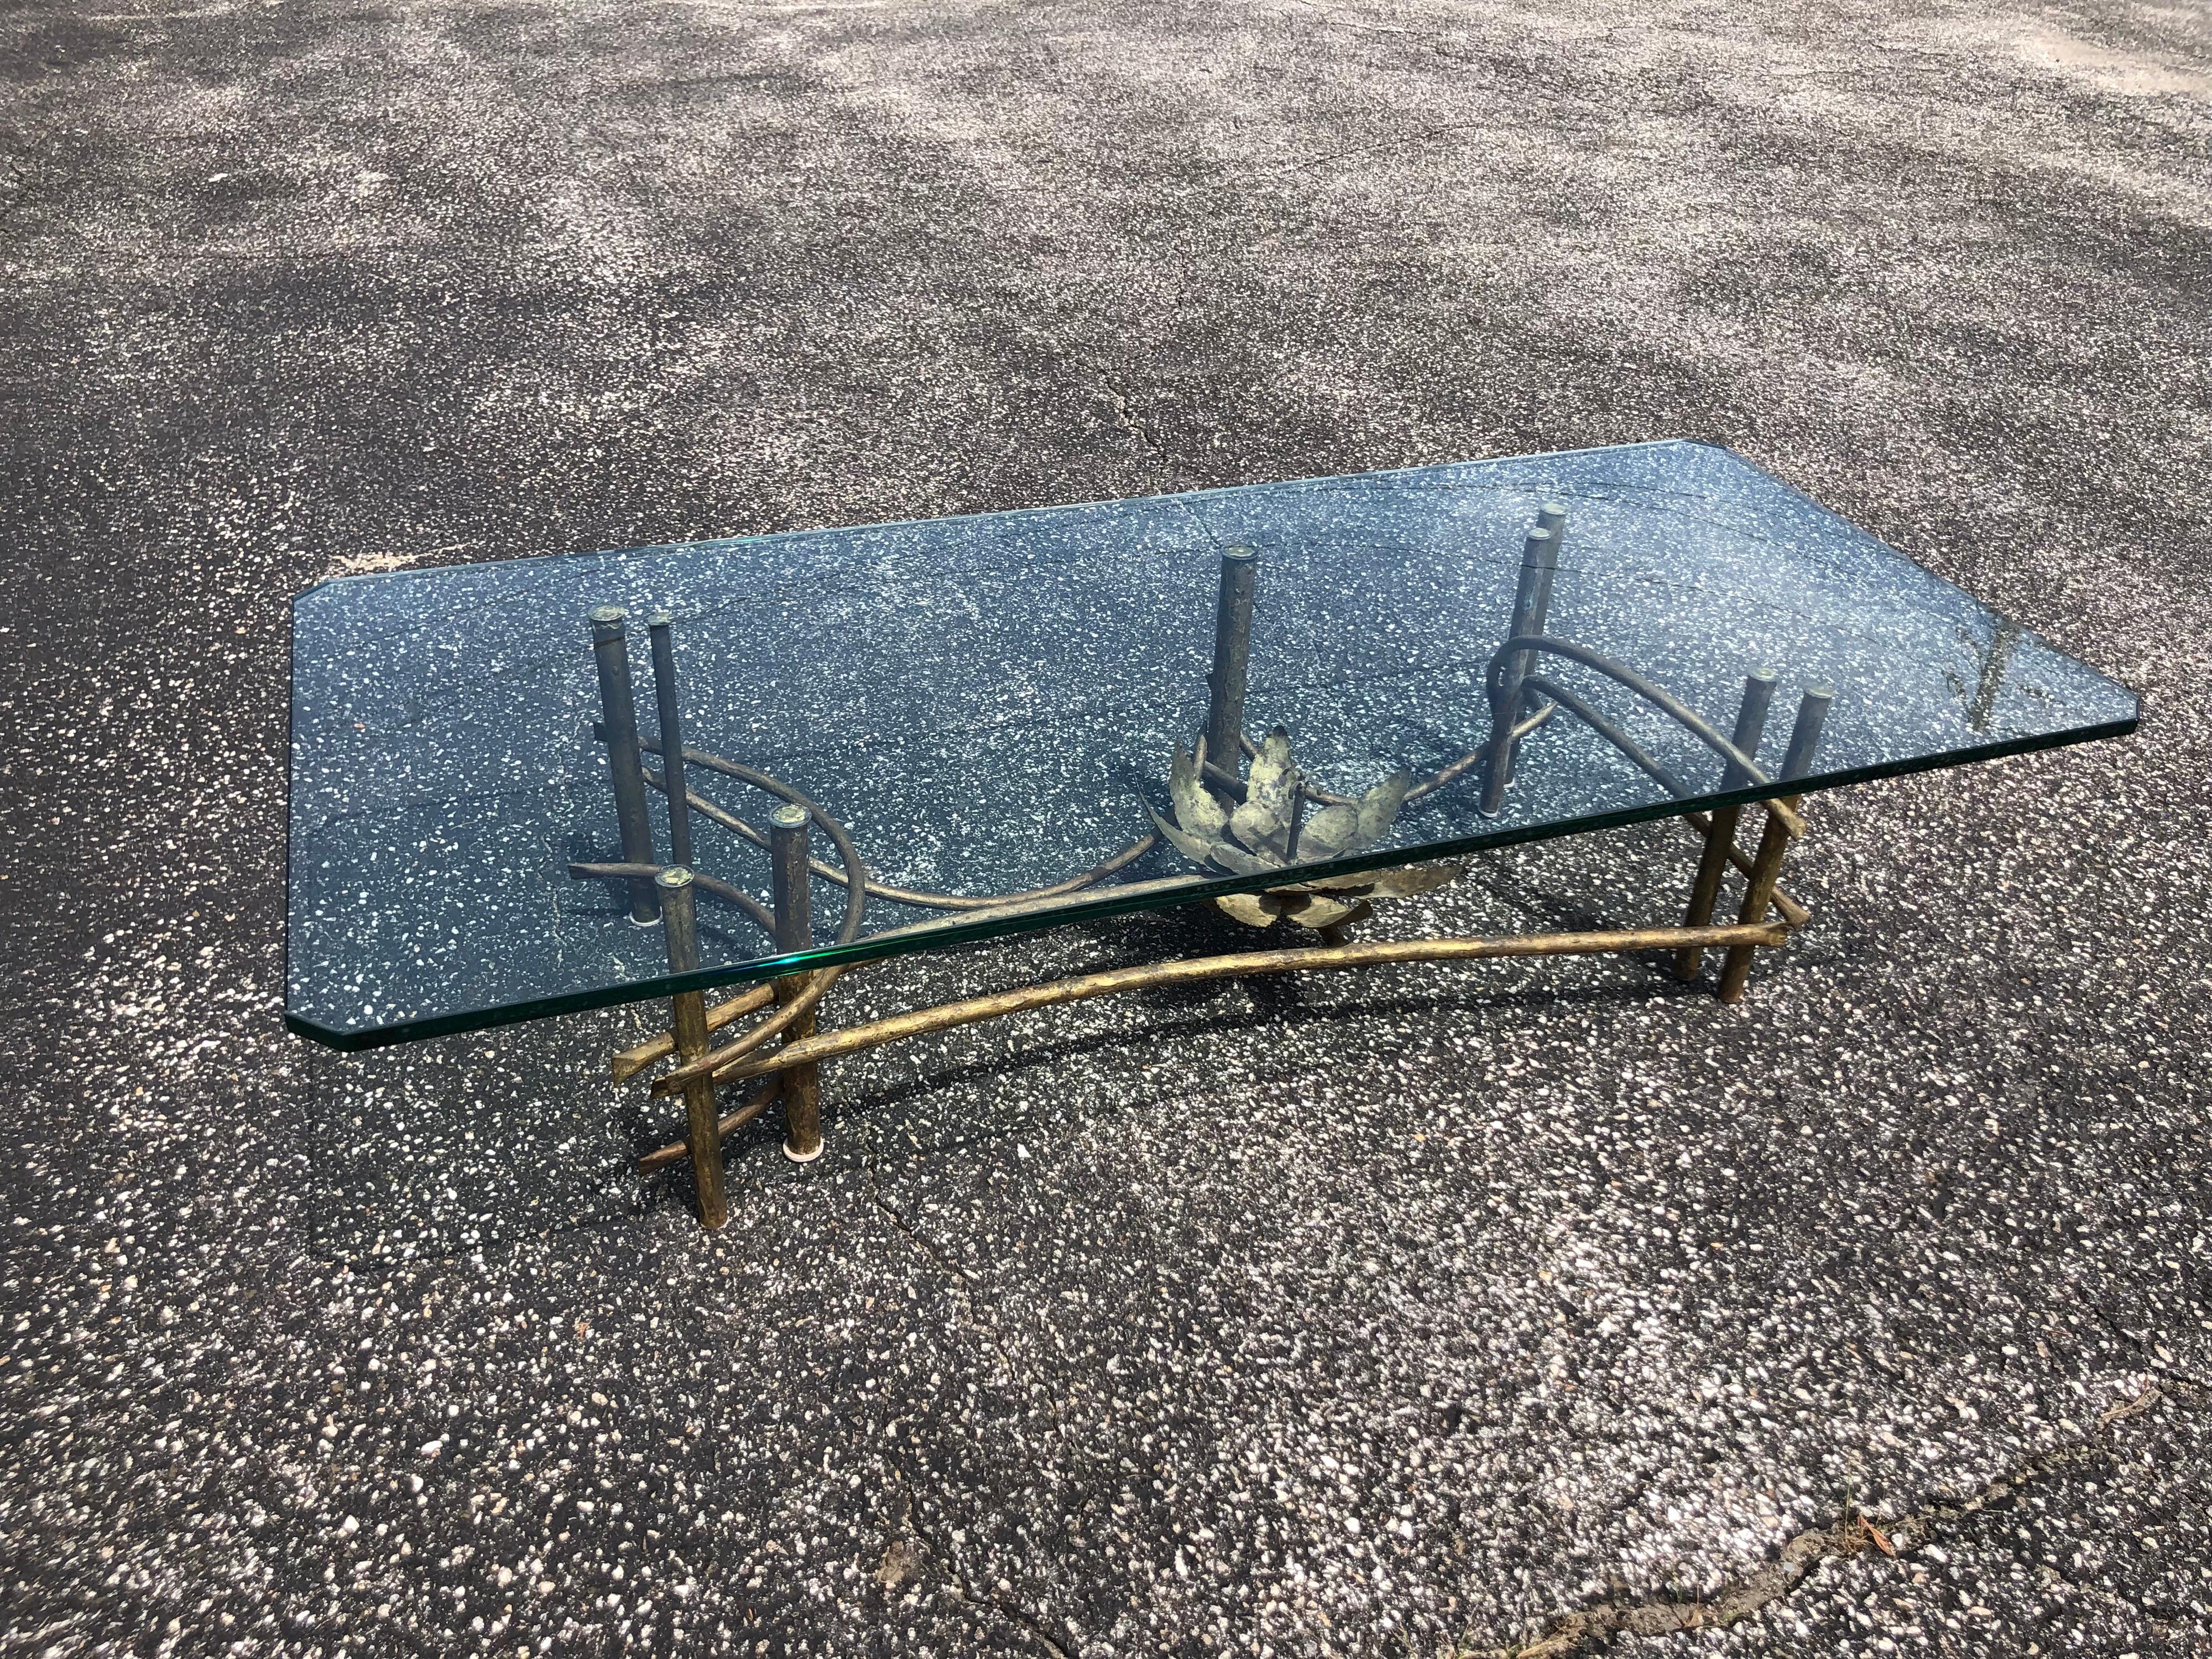 Brutalist midcentury Lotus Flower table by Silas Seandel. Amazing torch cut piece of sculpture to look at, as it functions as a table. The focal centerpiece is a Lotus shaped Water Lilly flower. Mixed metals make up the design. Very thick one inch